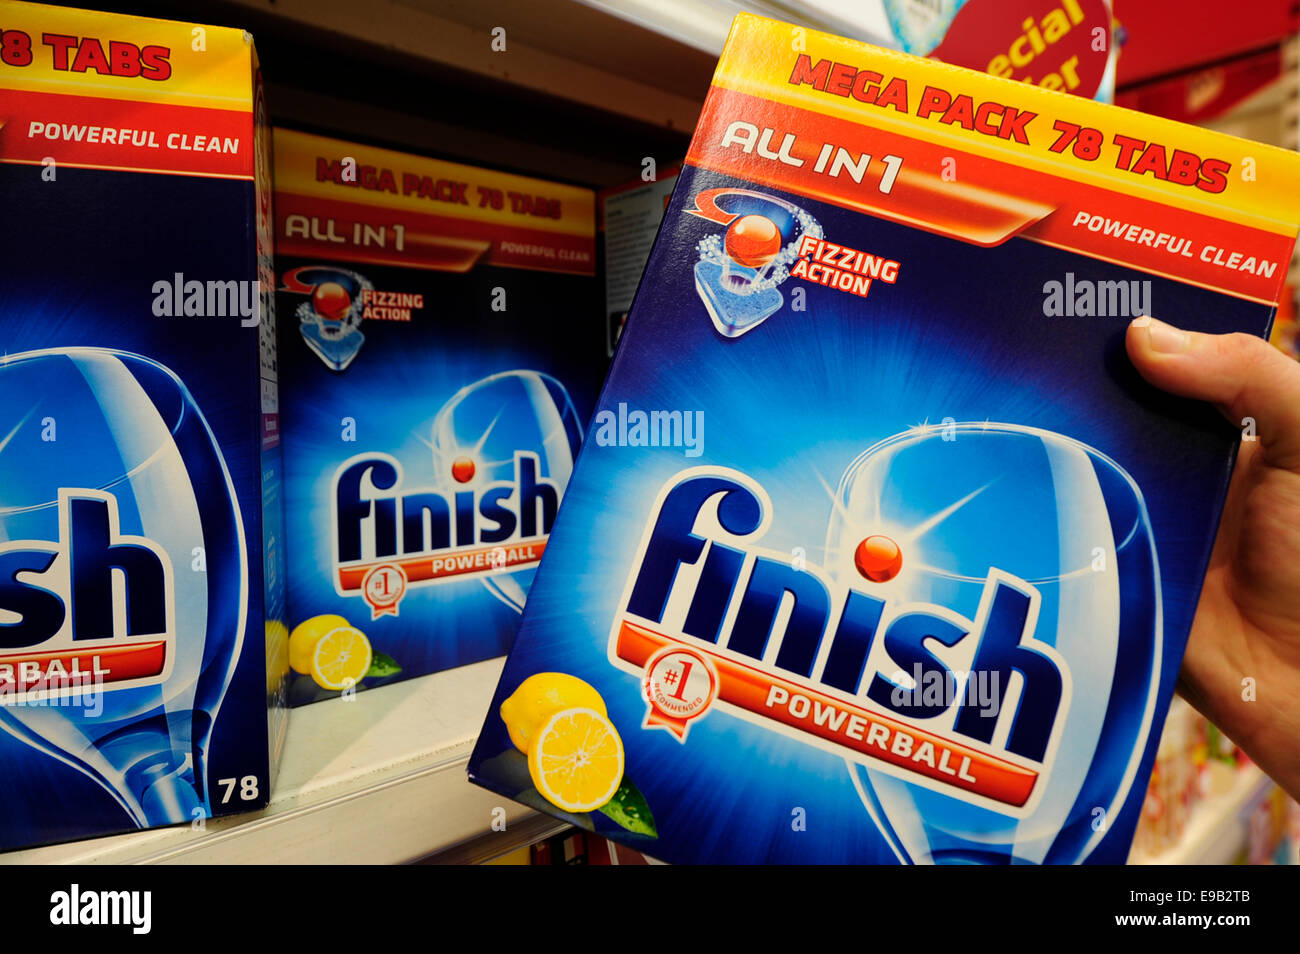 Finish powerball dishwashing tablets been taken form the shelf  (Newscast)(Model Released) Stock Photo